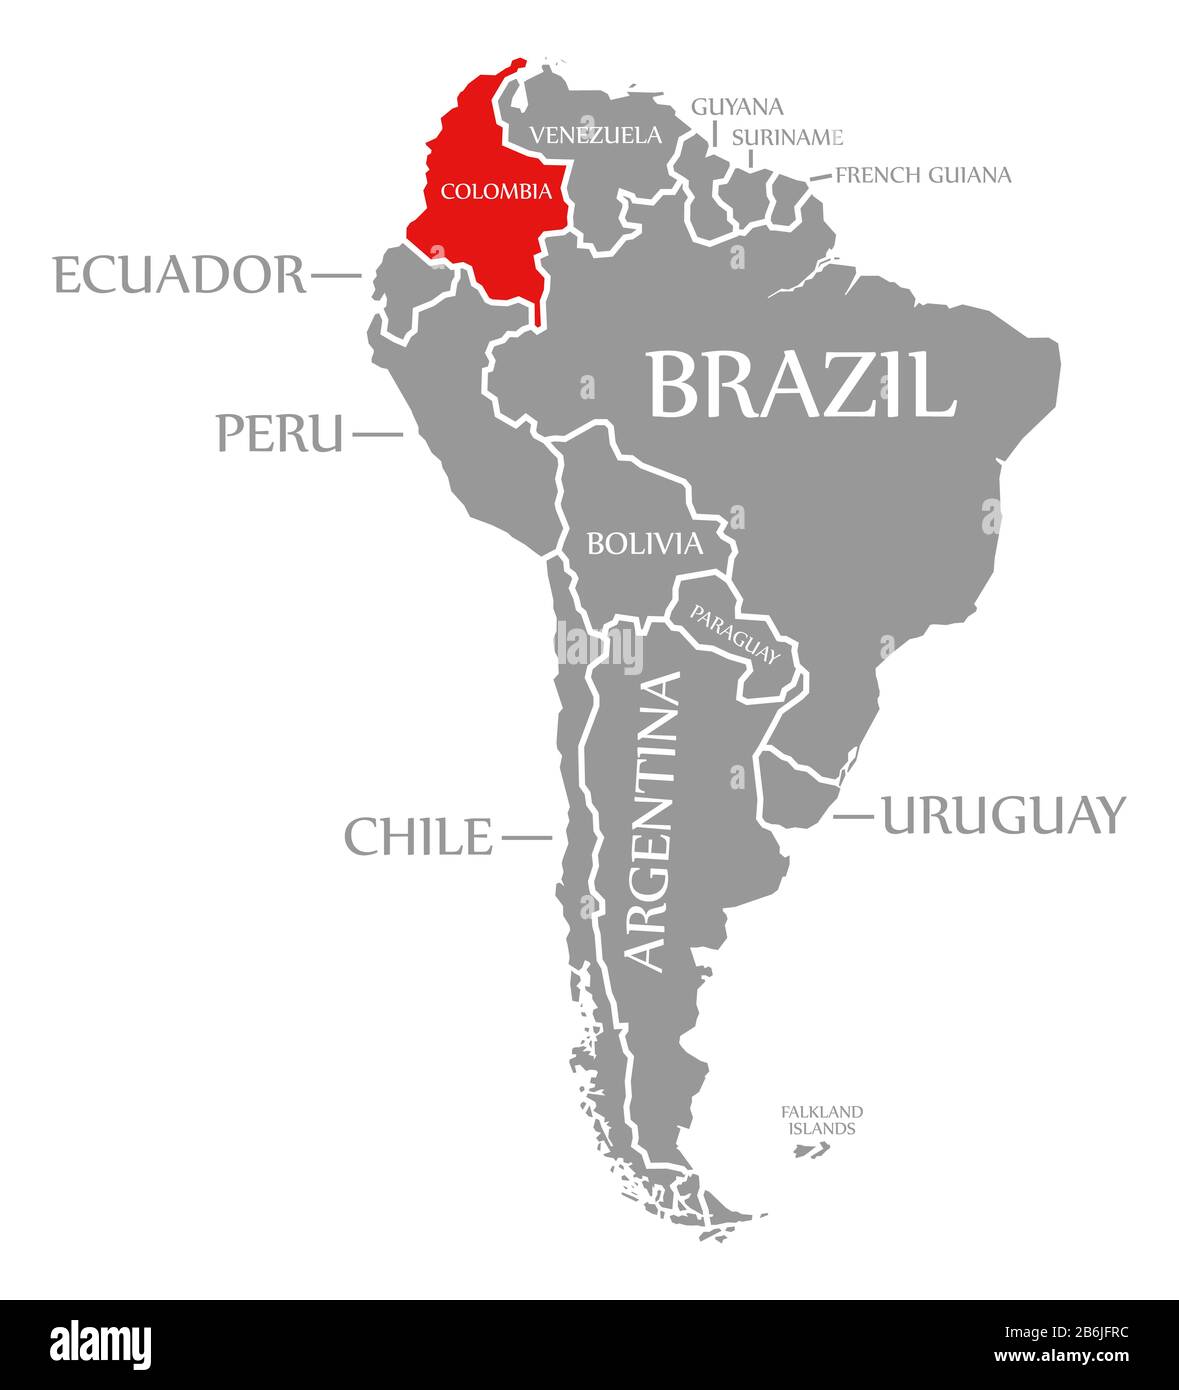 Colombia red highlighted in continent map of South America Stock Photo